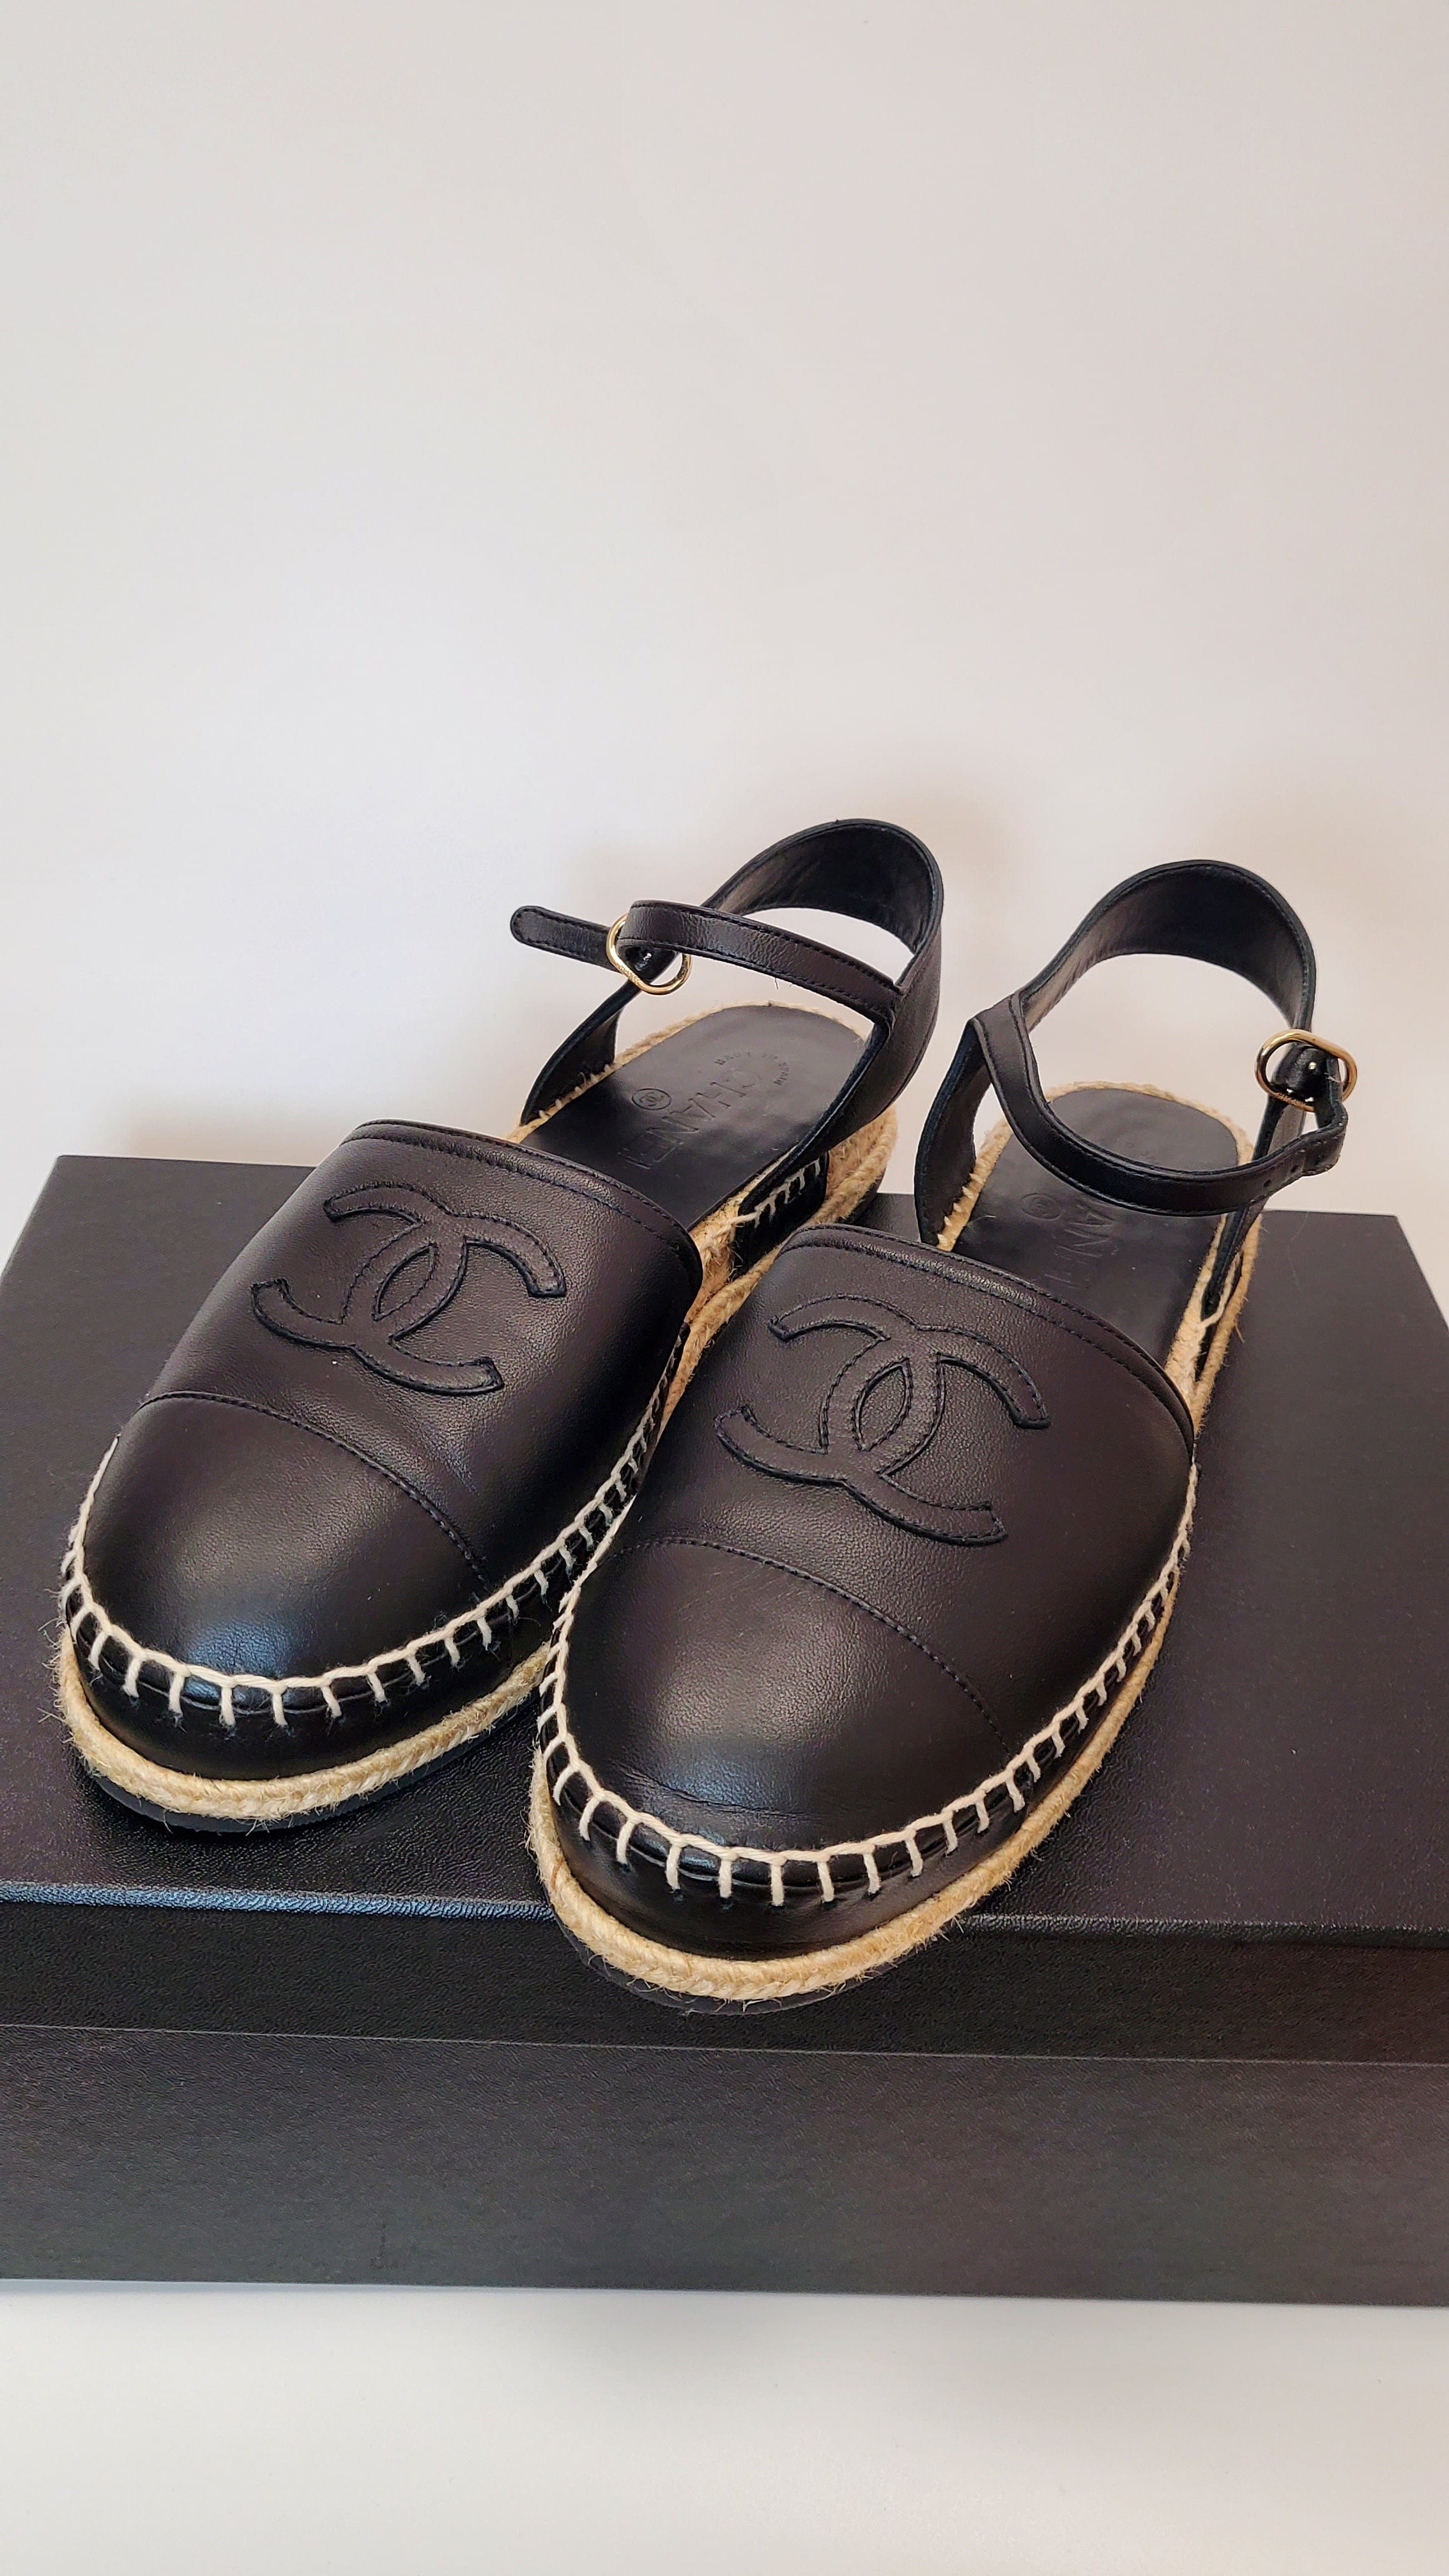 Chanel Espadrilles  Unboxing, Price, Fit & Review 